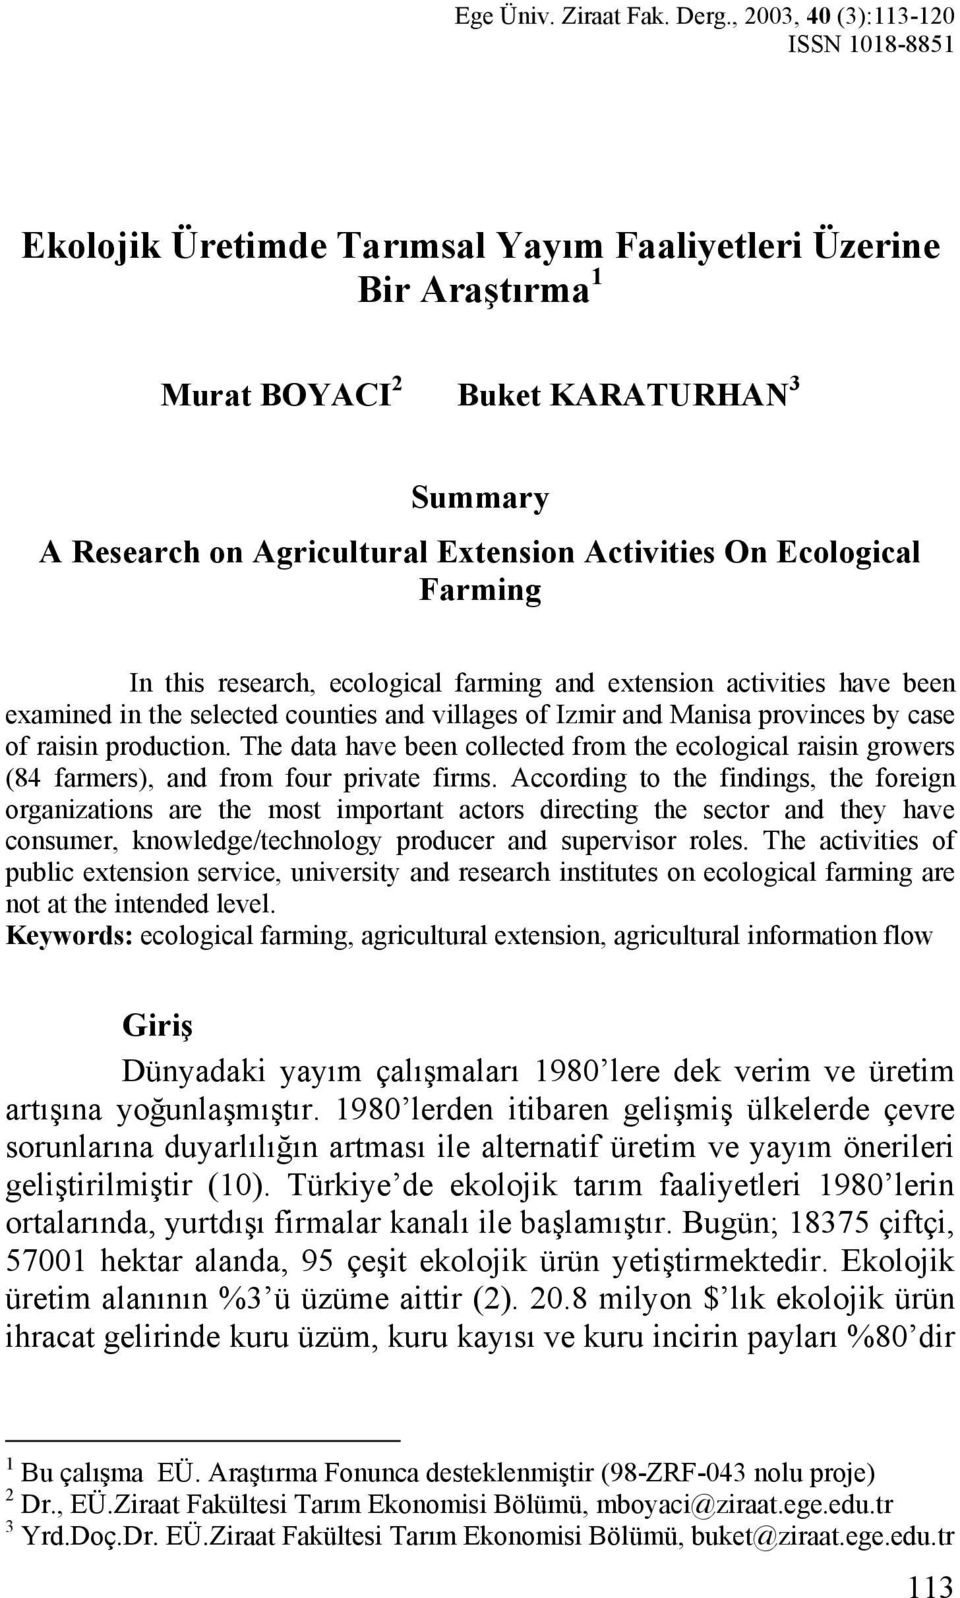 On Ecological Farming In this research, ecological farming and extension activities have been examined in the selected counties and villages of Izmir and Manisa provinces by case of raisin production.